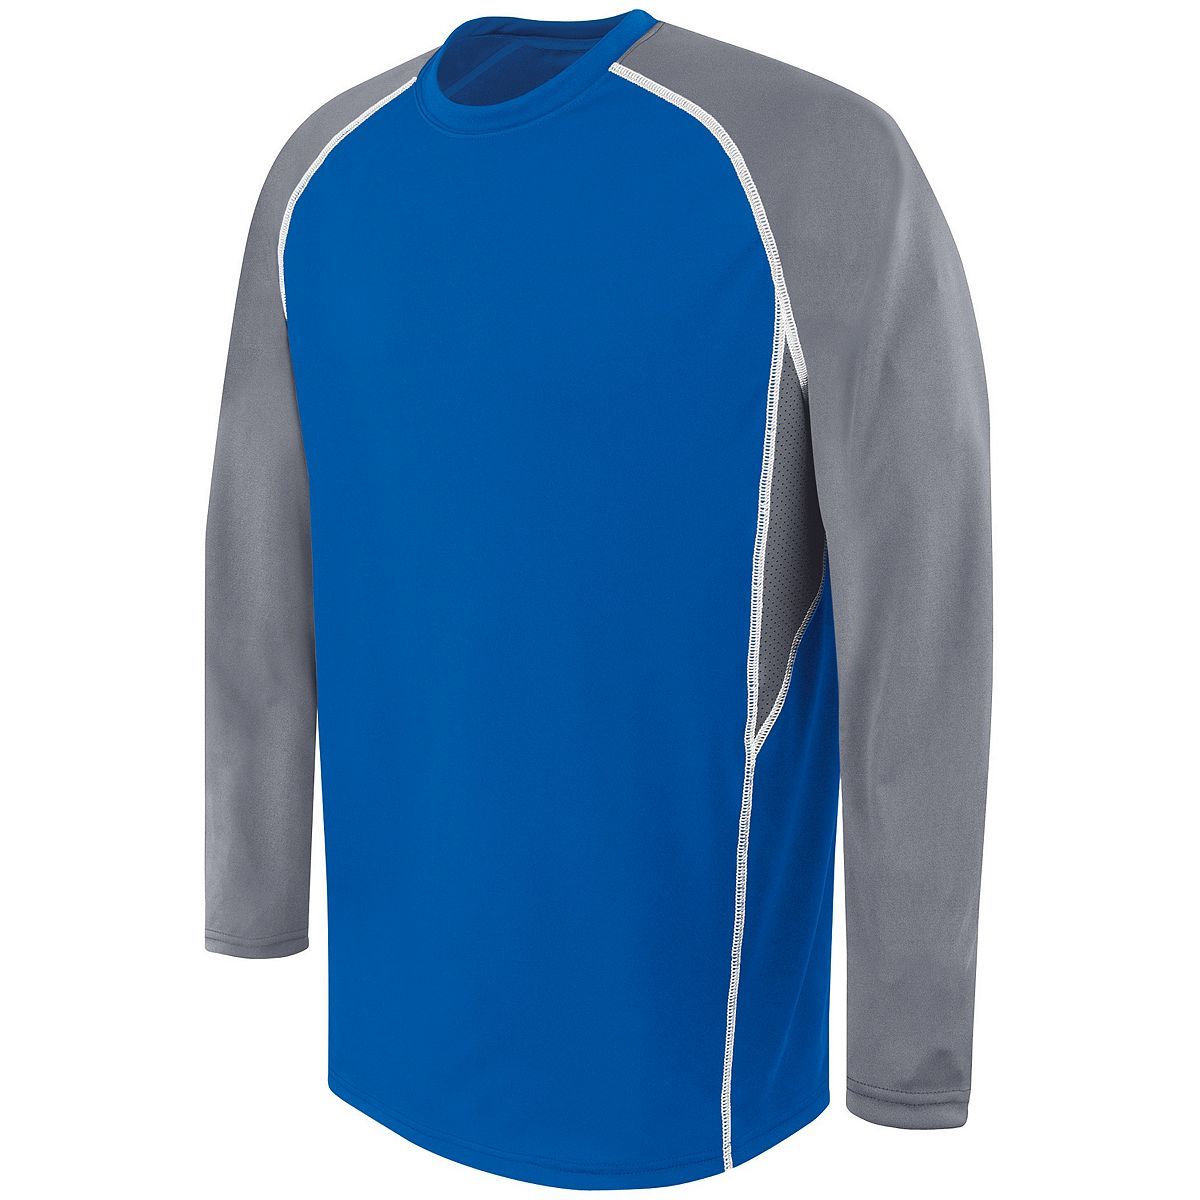 High 5 Adult Long Sleeve Evolution Top in Royal/Graphite/White  -Part of the Adult, High5-Products, Shirts product lines at KanaleyCreations.com